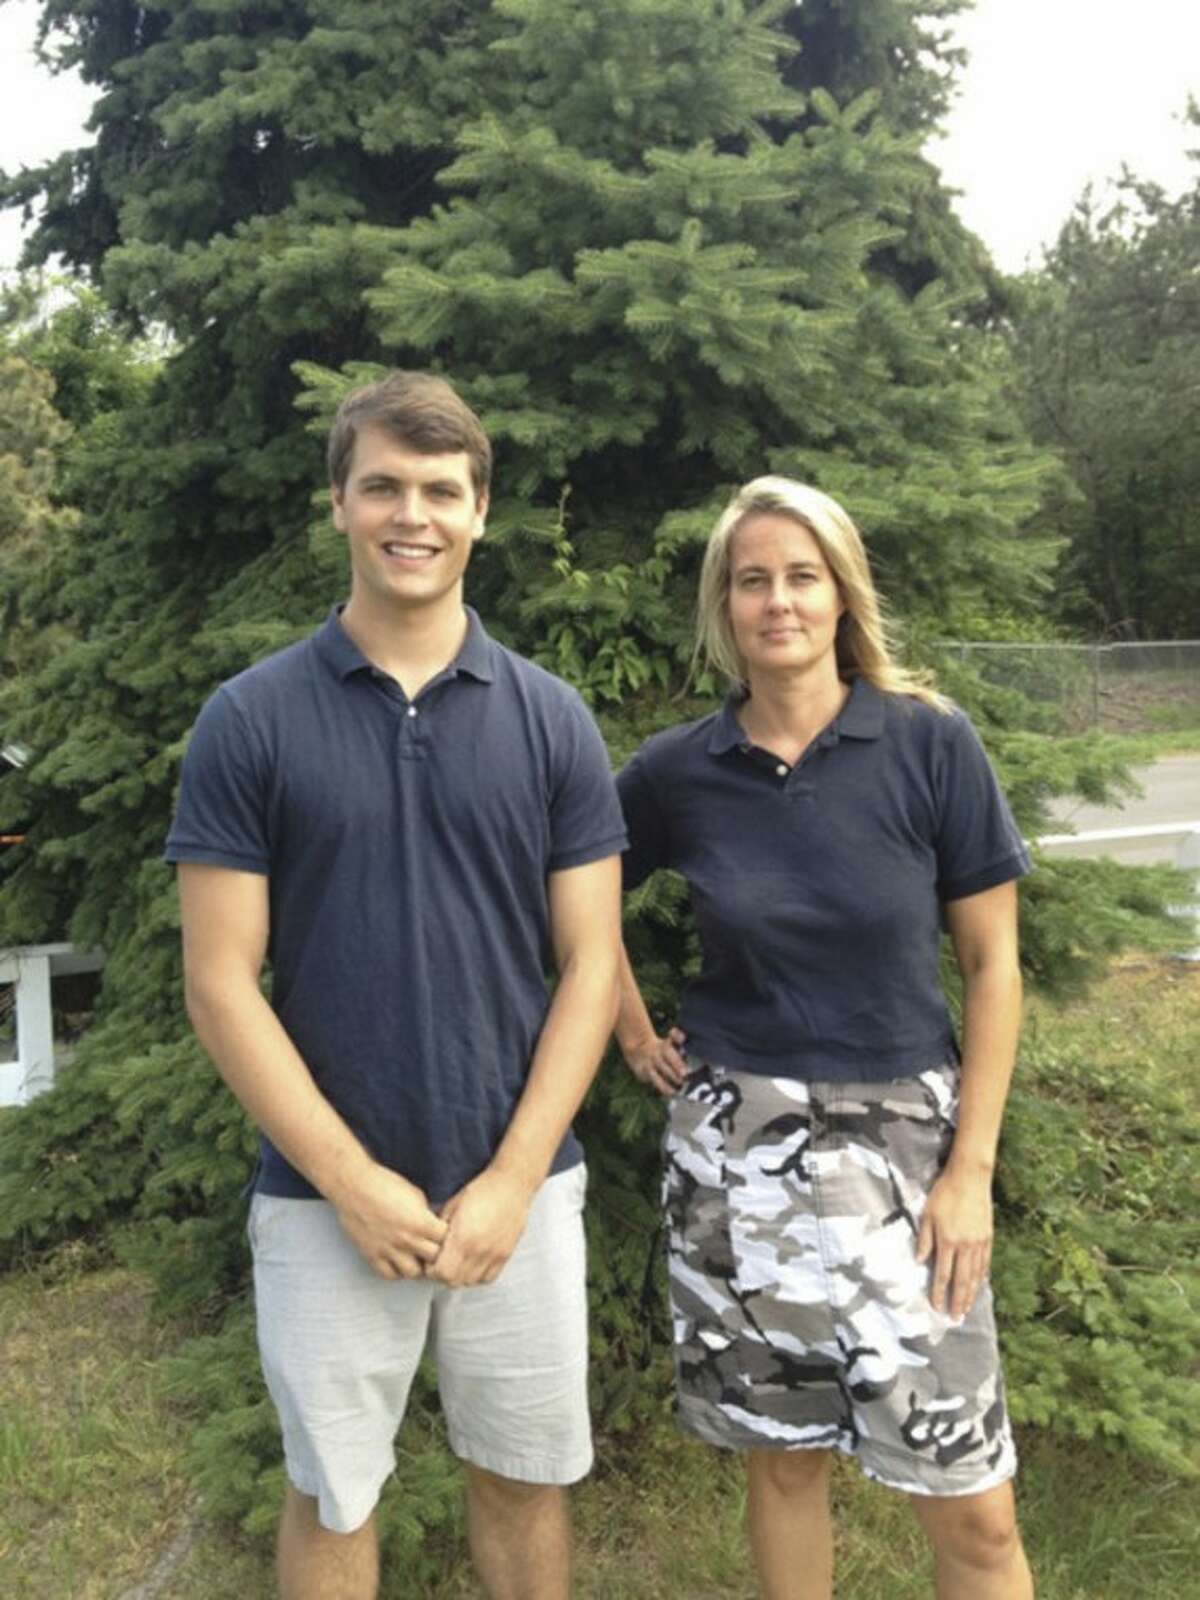 Contributed photo. Chris Coyne, former Staples High football player and current Yale University student; and Katherine Snedaker of SportsCAPP (Sports Concussion Awareness and Prevention Program). She is hosting an event on Thursday at Saugatuck Elementary School on concussion awareness.